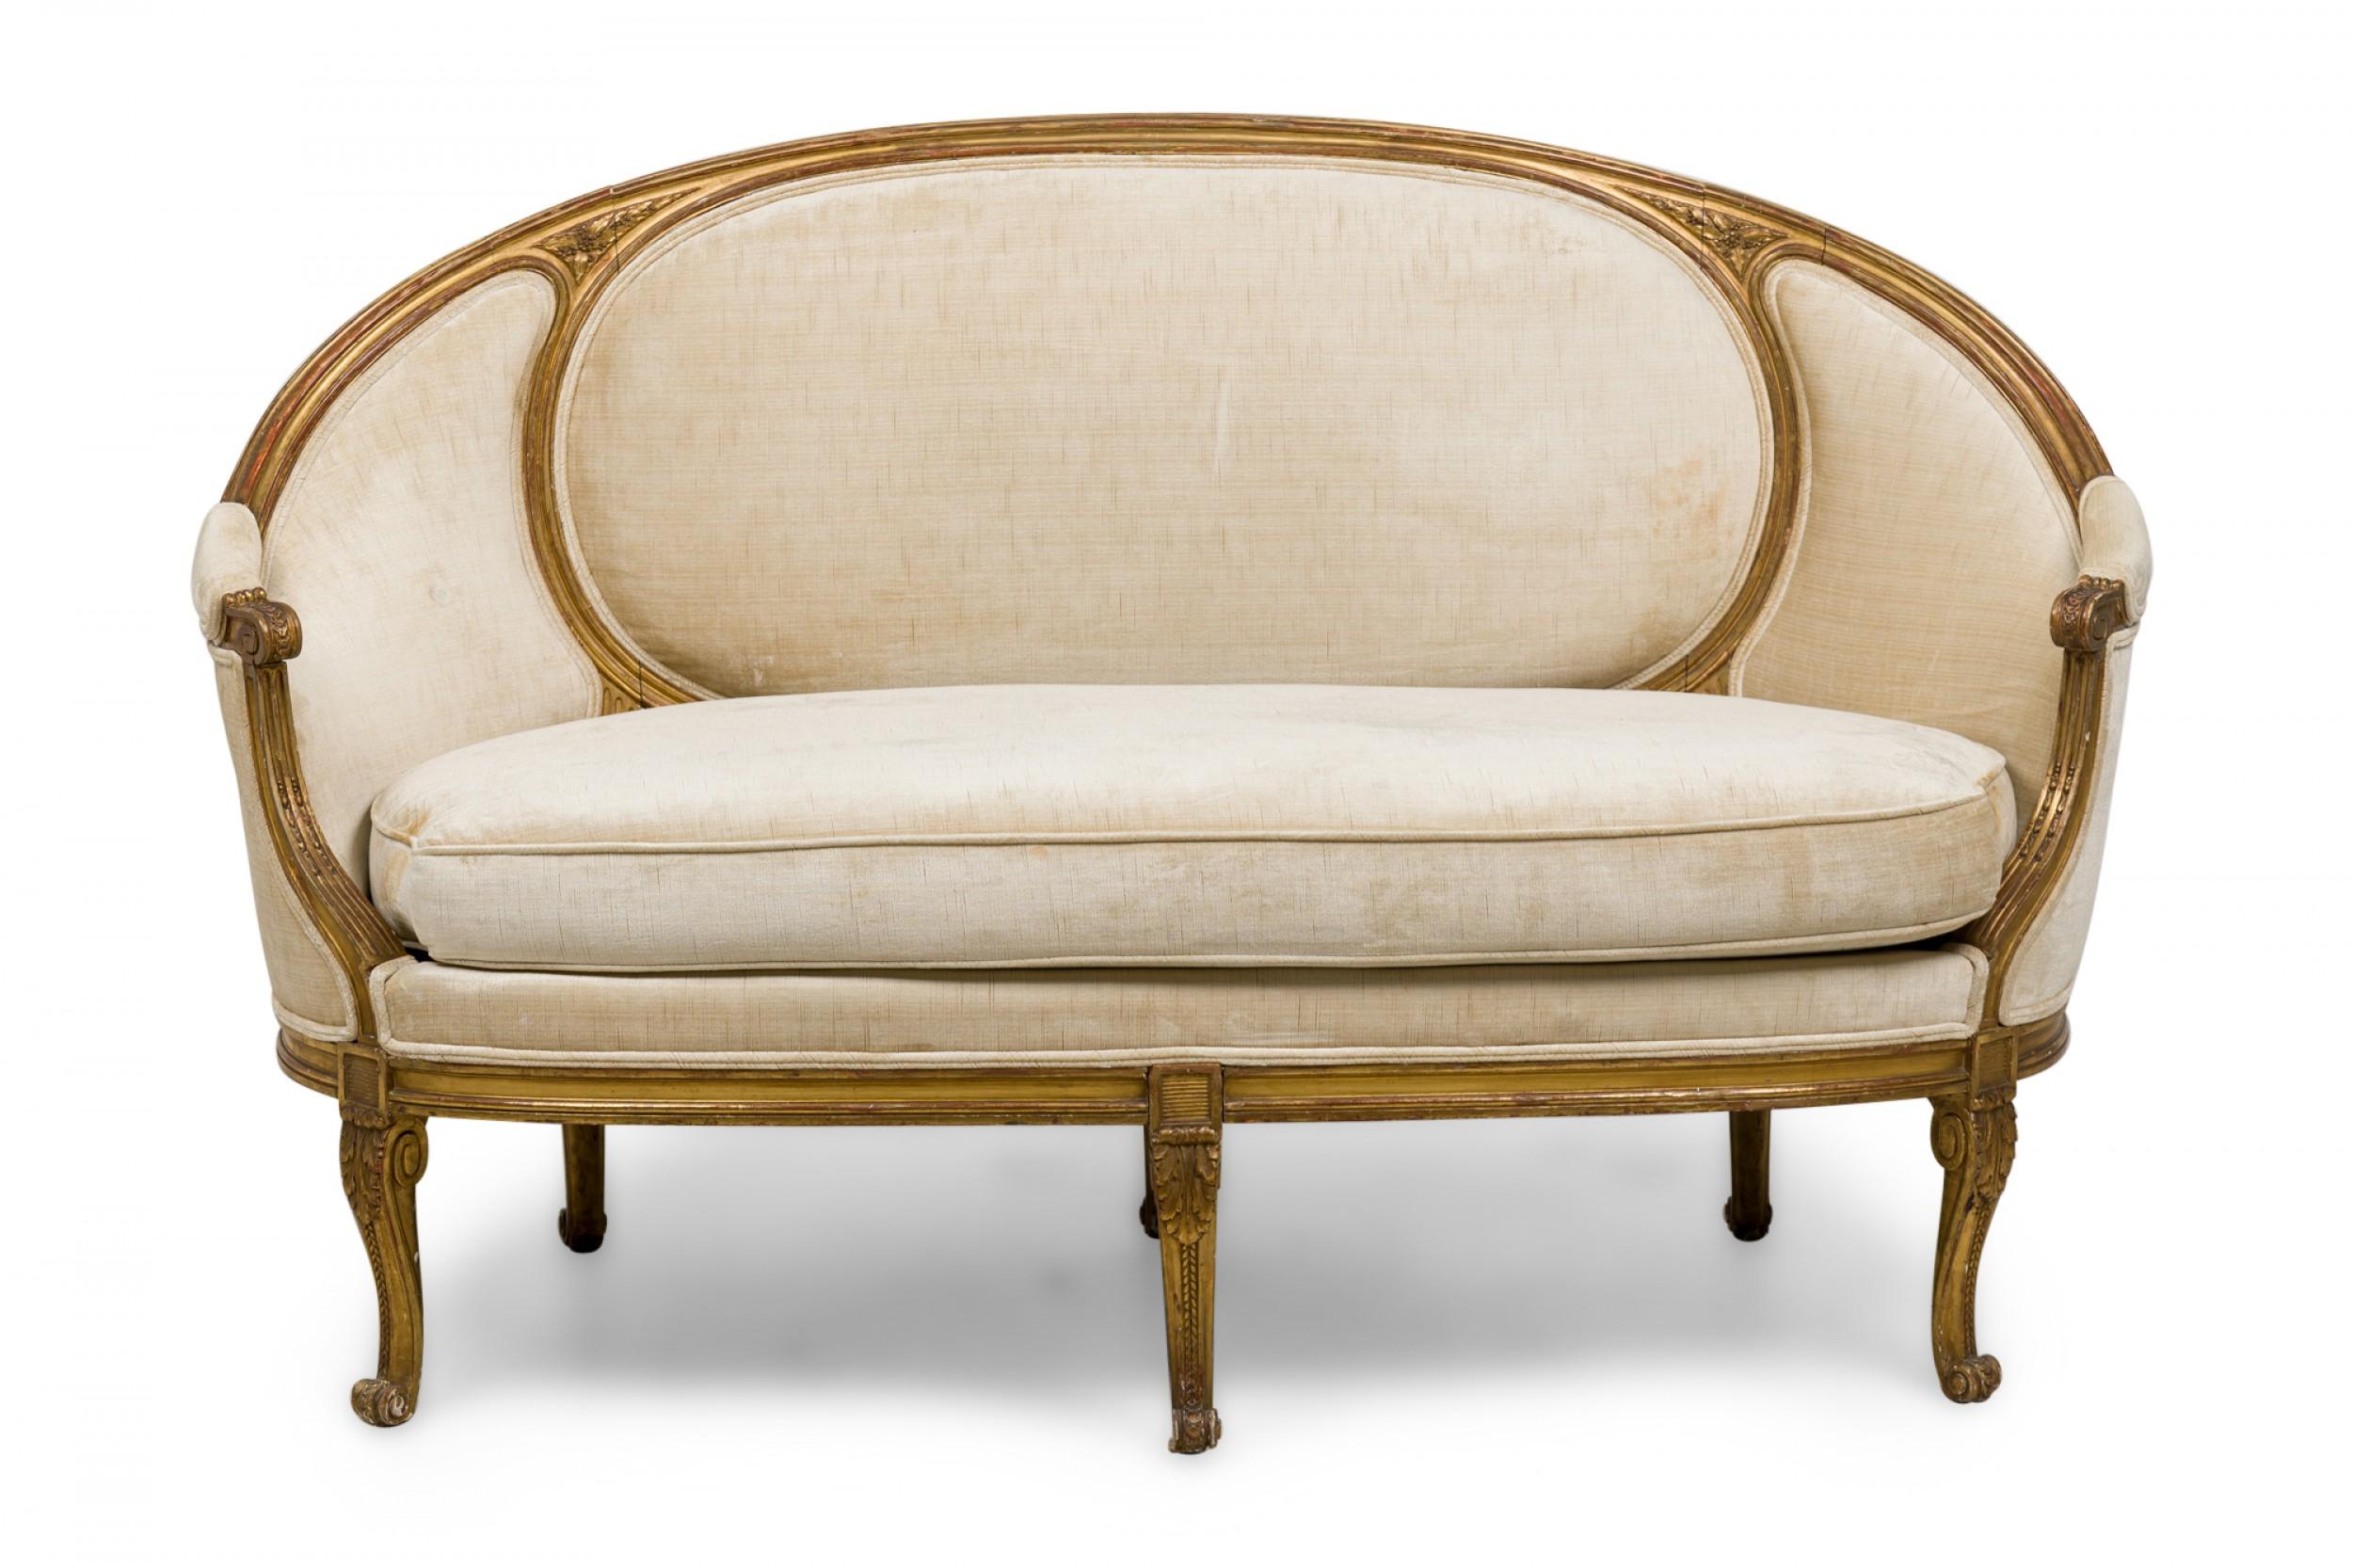 Fabric Pair of French Louis XVI Giltwood Beige Upholstered Canapes / Settees For Sale